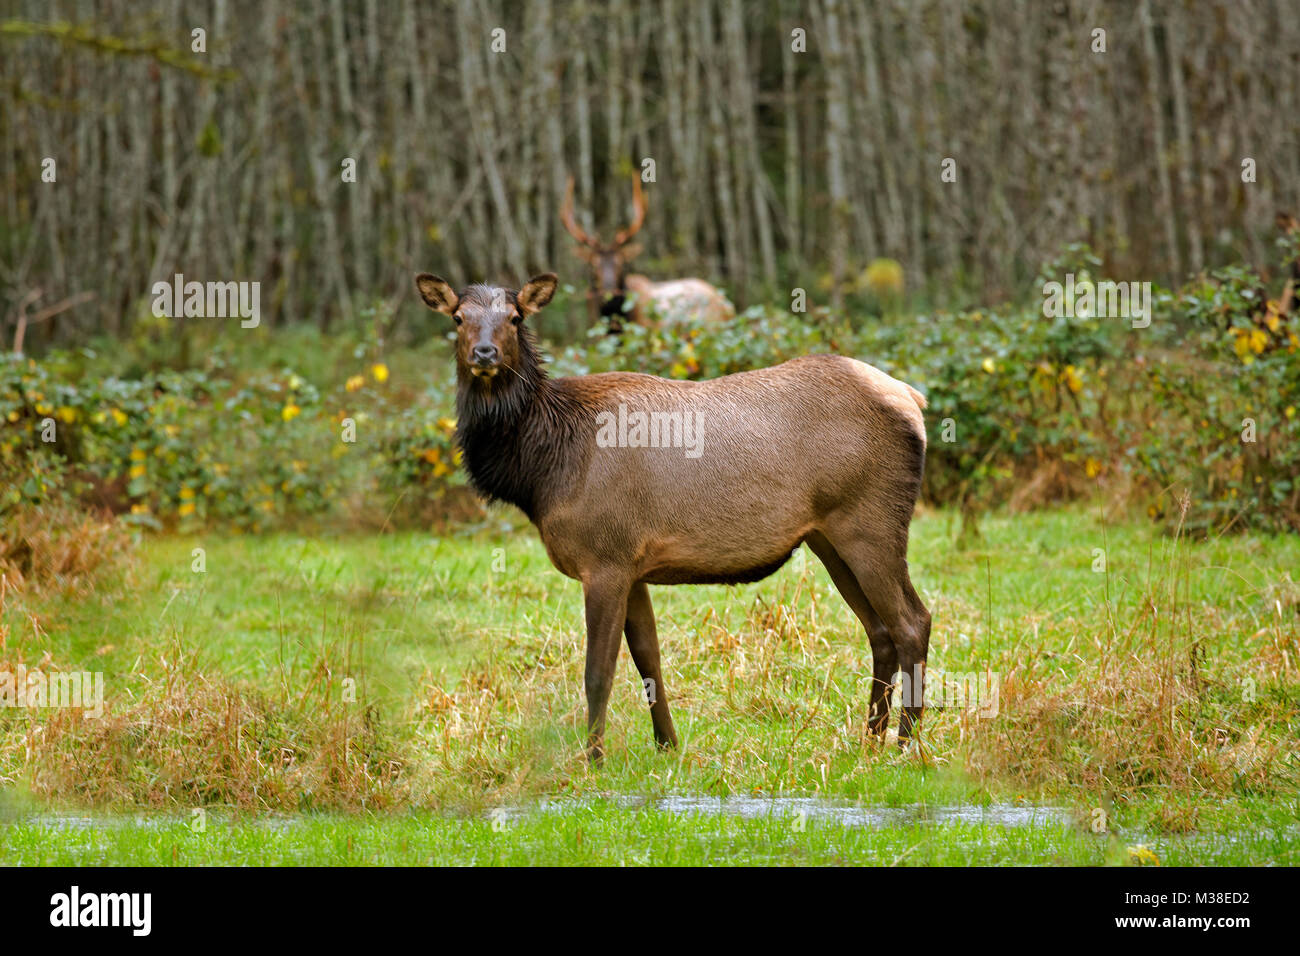 WA13323-00...WASHINGTON - Elk grazing in a meadow in the Quinault River Valley area of Olympic National Park. Stock Photo